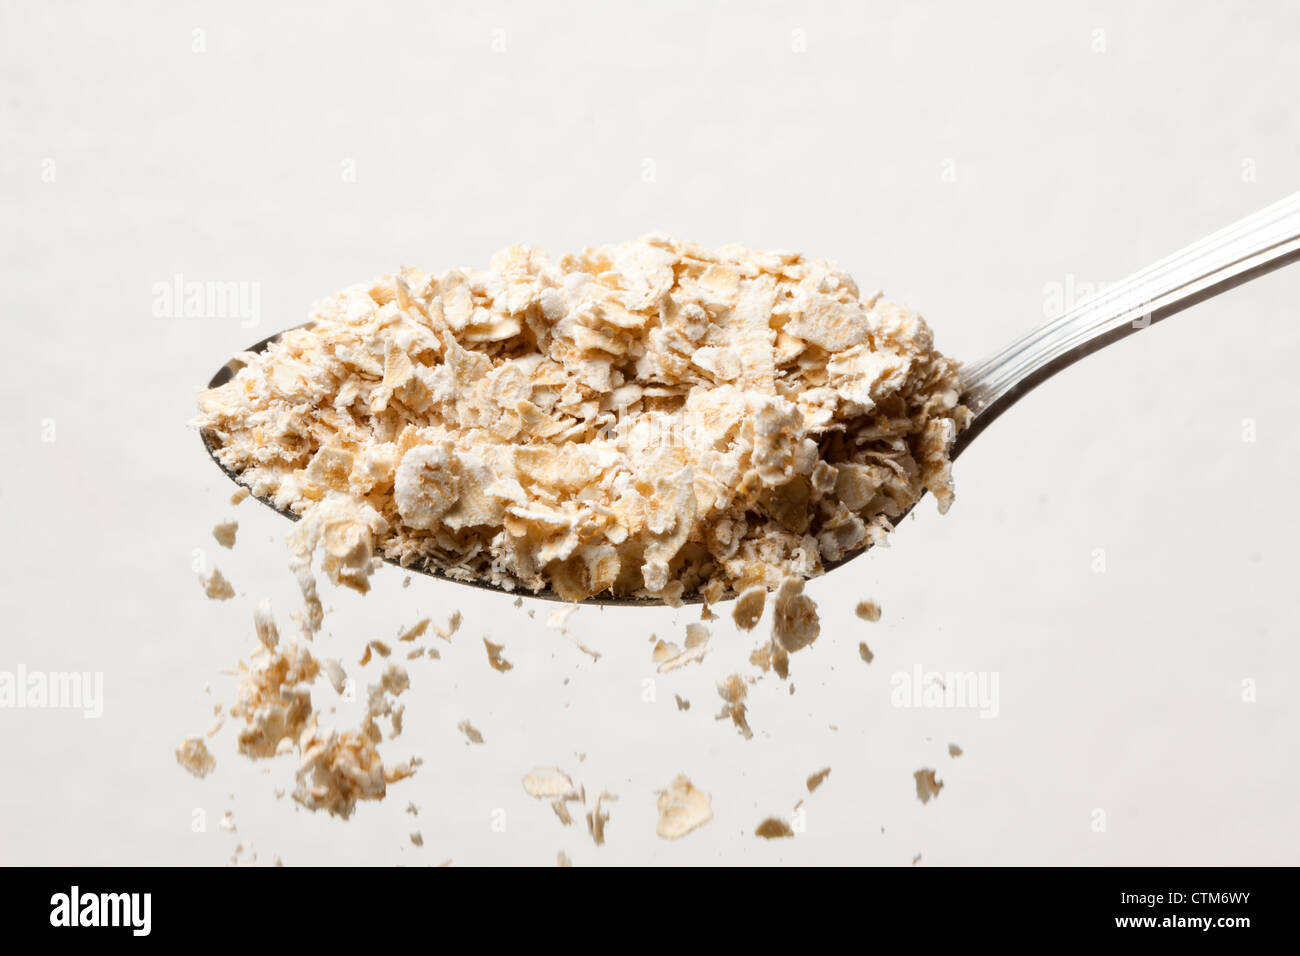 Spoon of oatmeal with some falling. Stock Photo